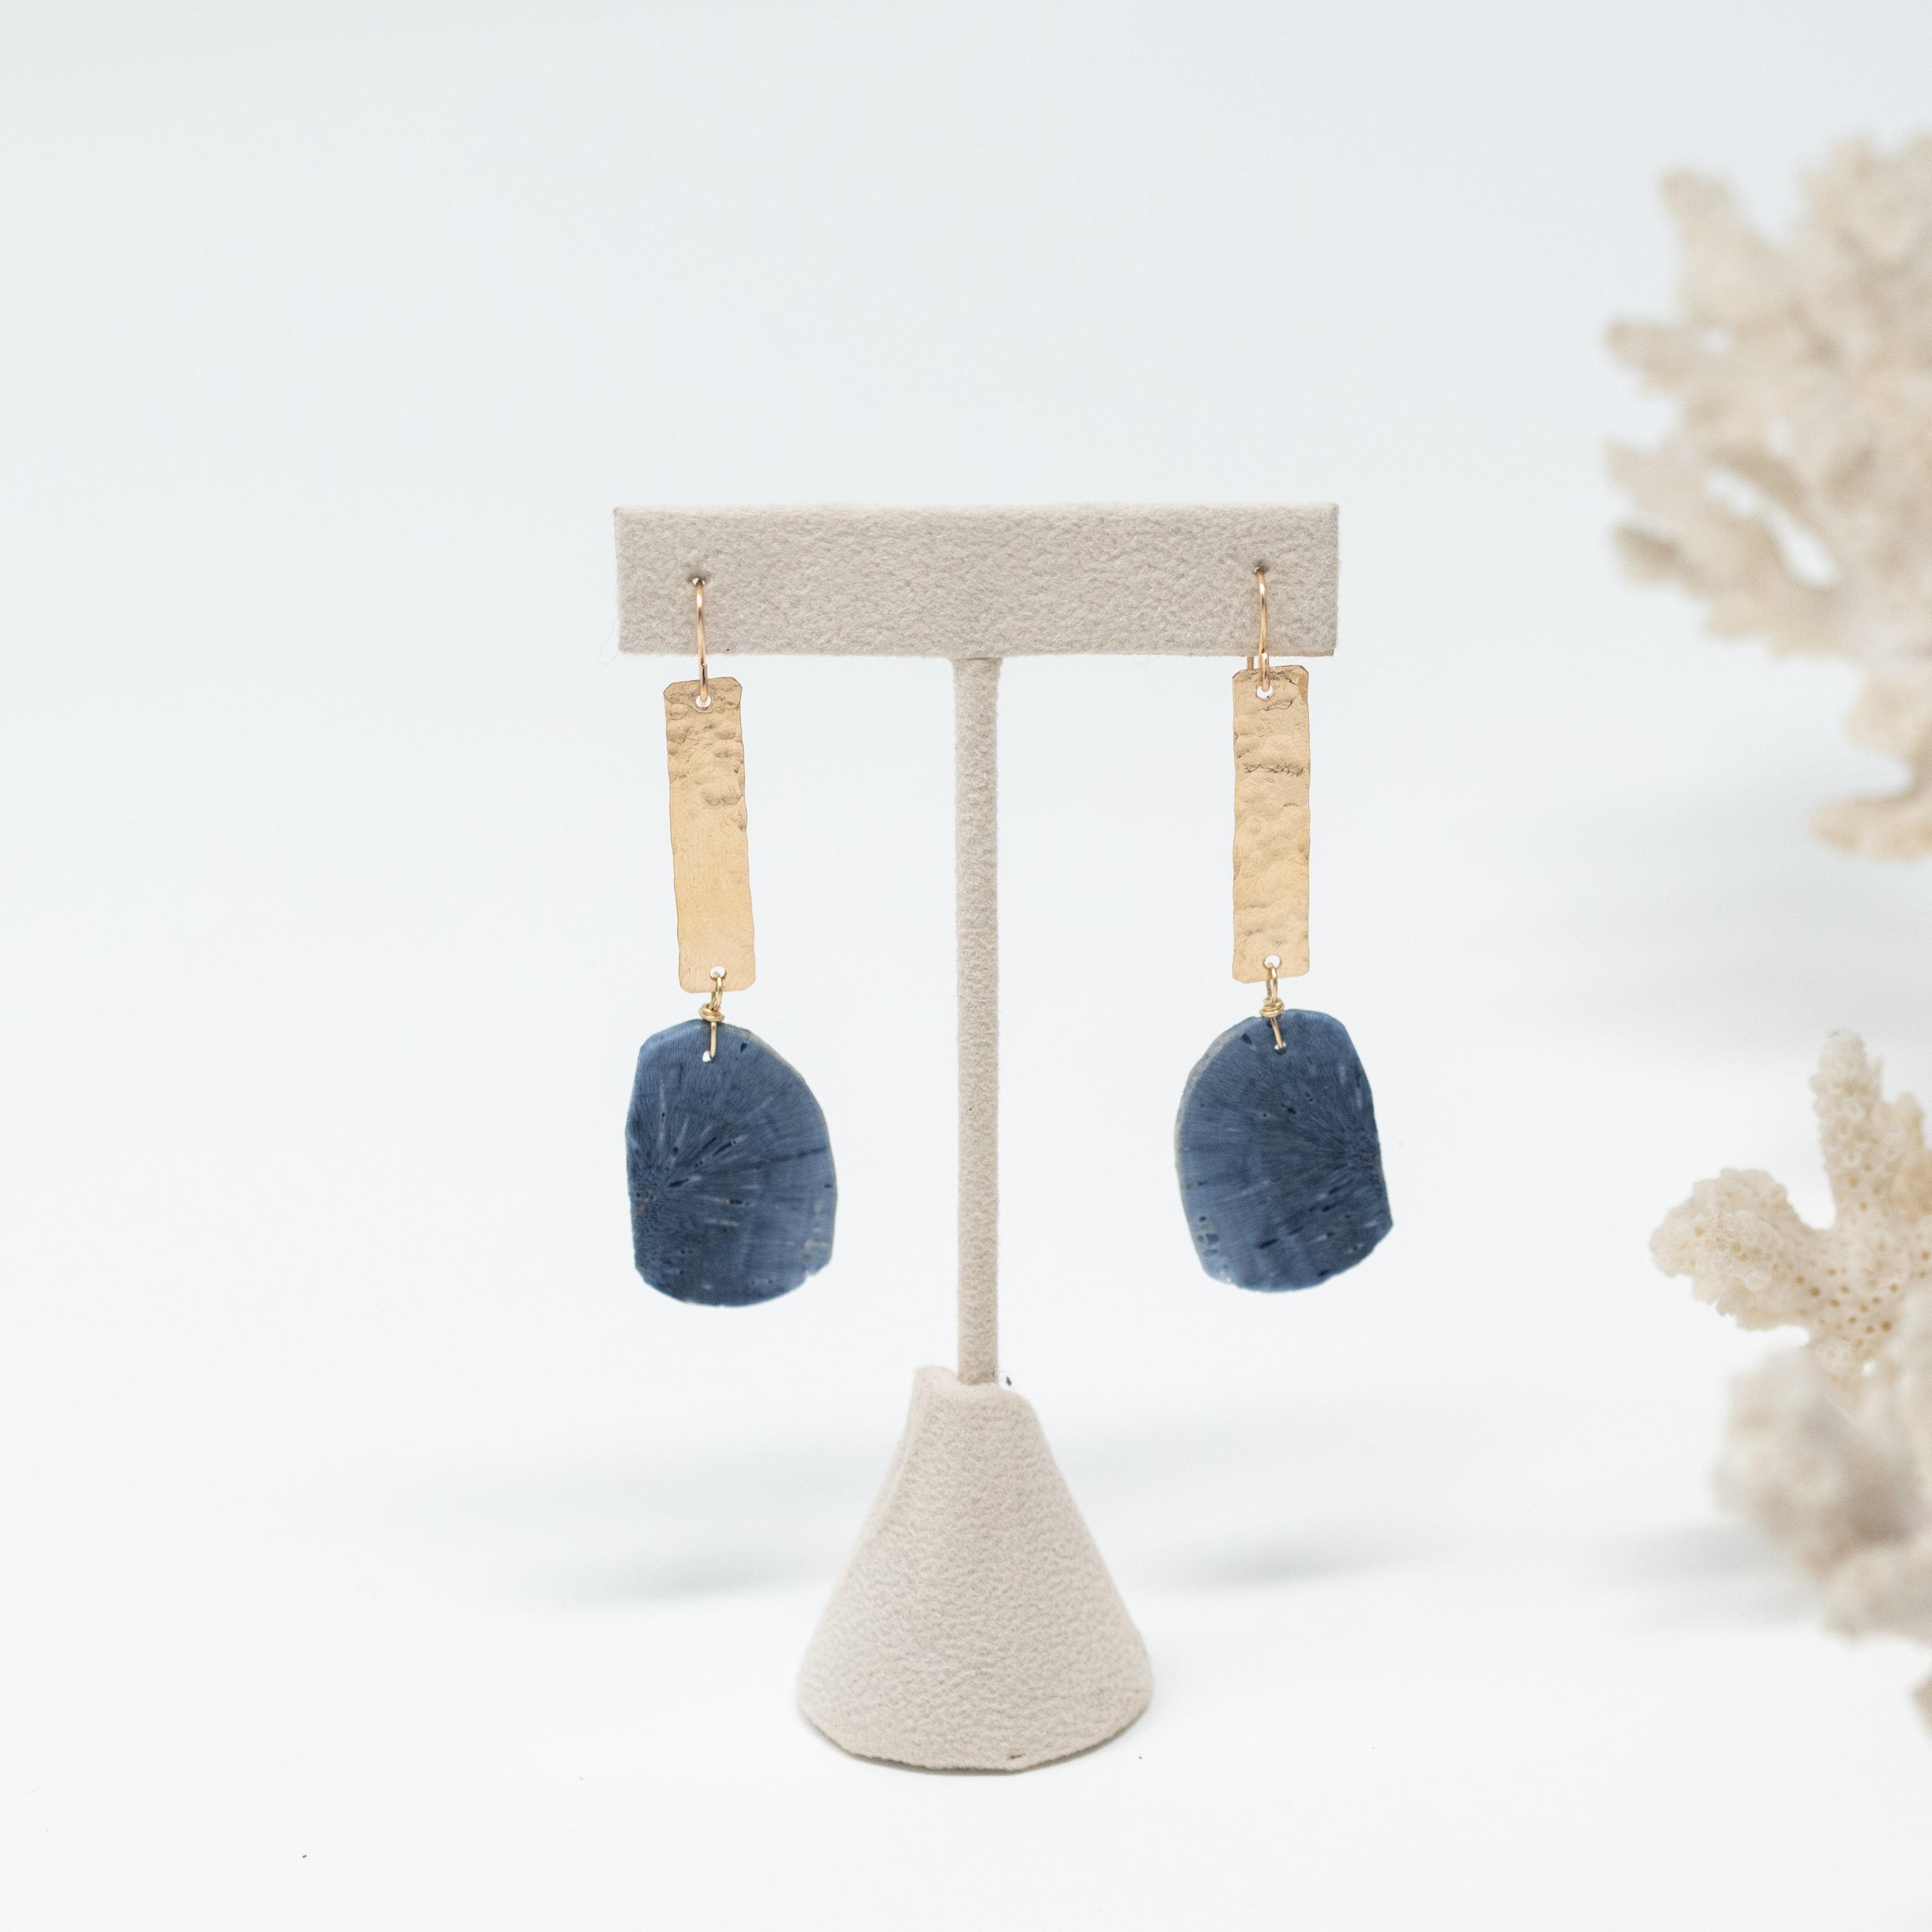 A pair of gold vertical bar earrings with a nickel sized piece of blue sponge coral wire wrapped to the bottom of the gold bar. Around 1.5 inches long.